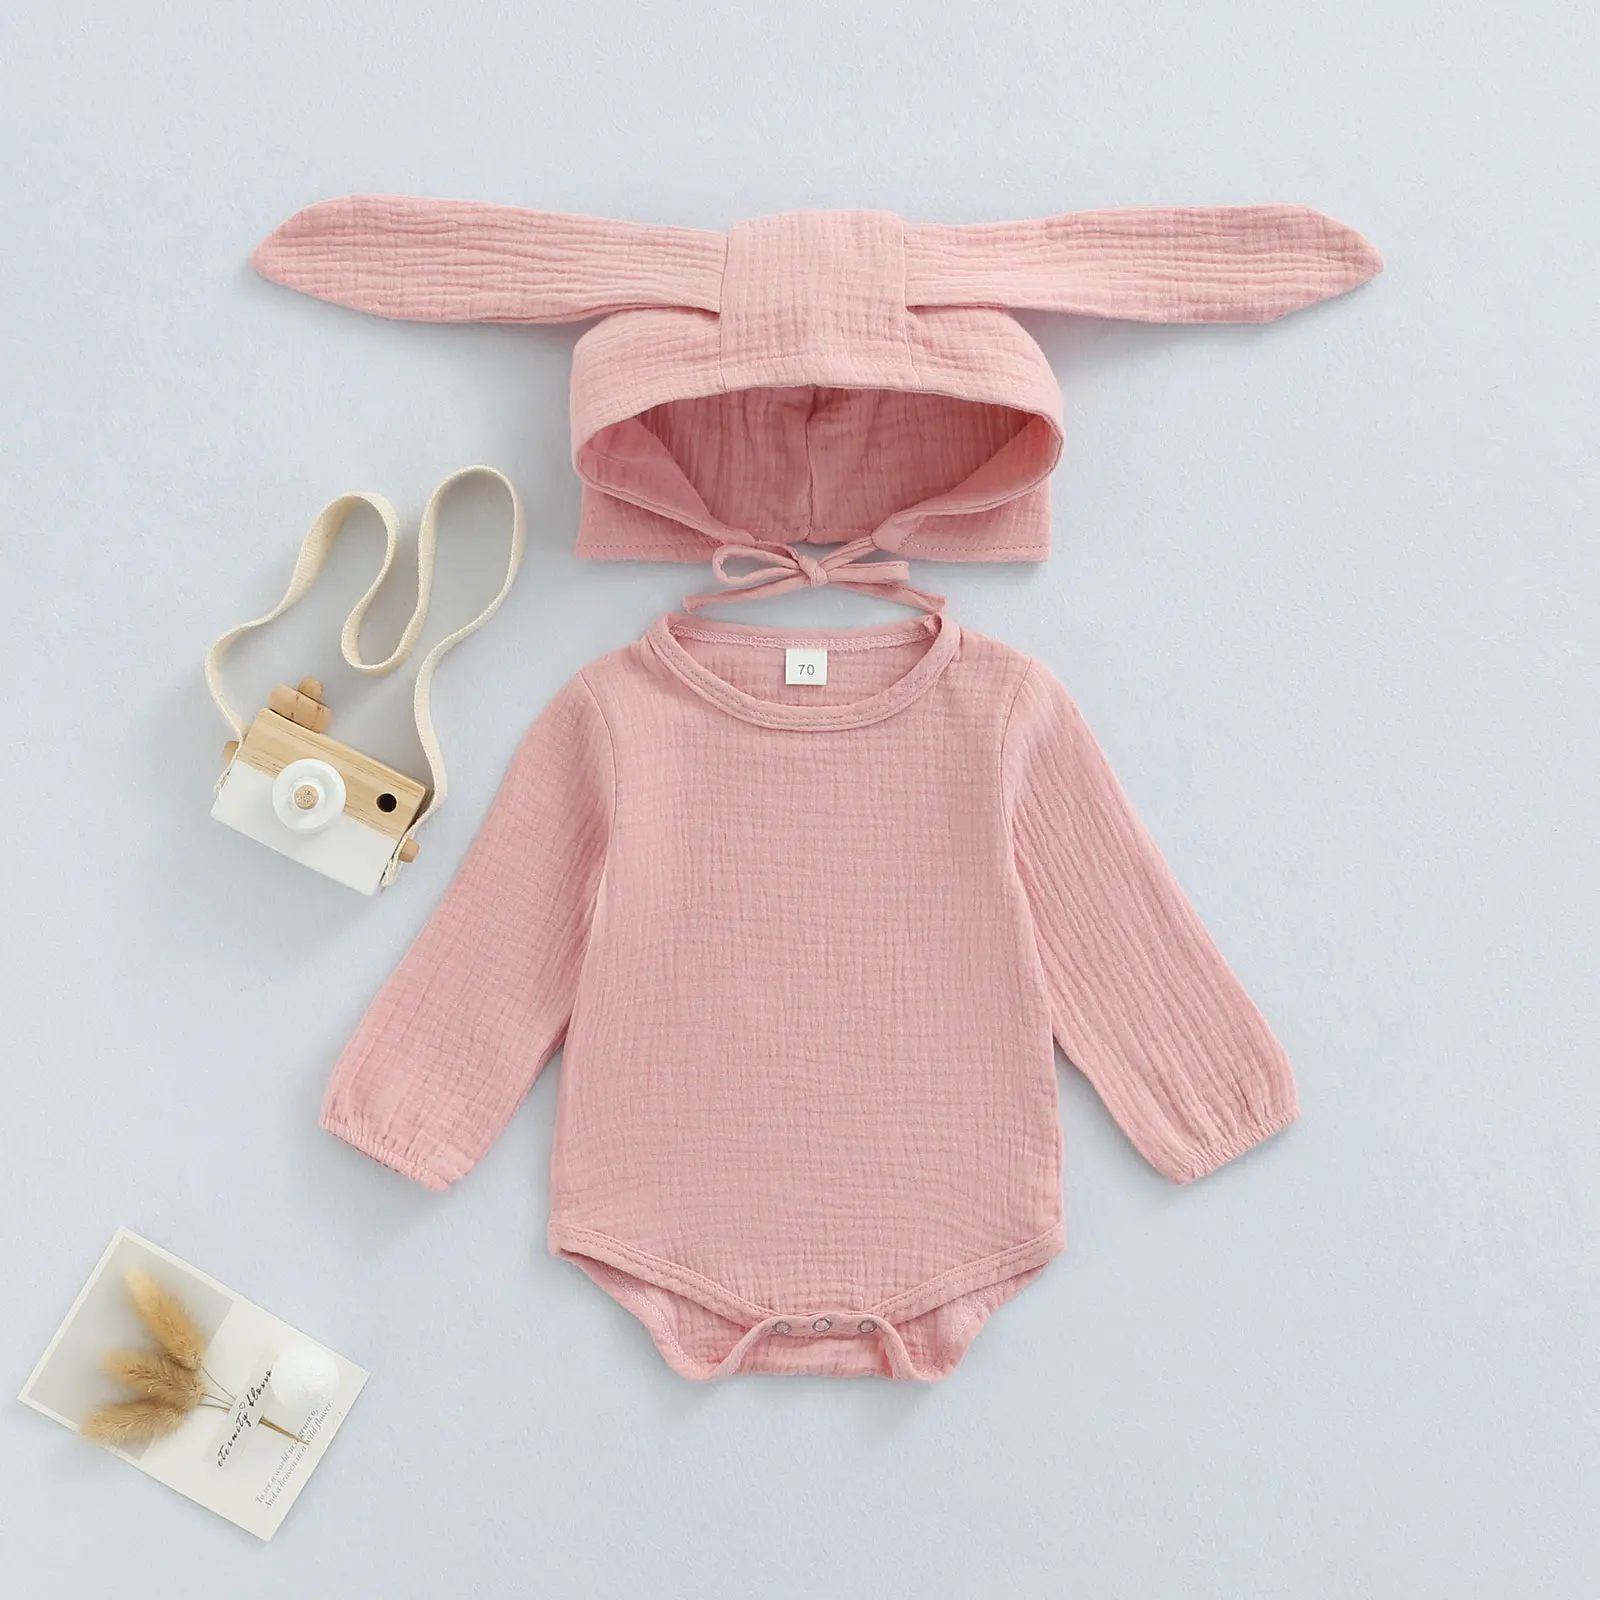 Ma&Baby 3-24M Newborn Infant Baby Boys Girls Bunny Romper Long Sleeve Jumpsuit + Long Ear Hat Autumn Spring Easter Clothes D84 Baby Bodysuits made from viscose 